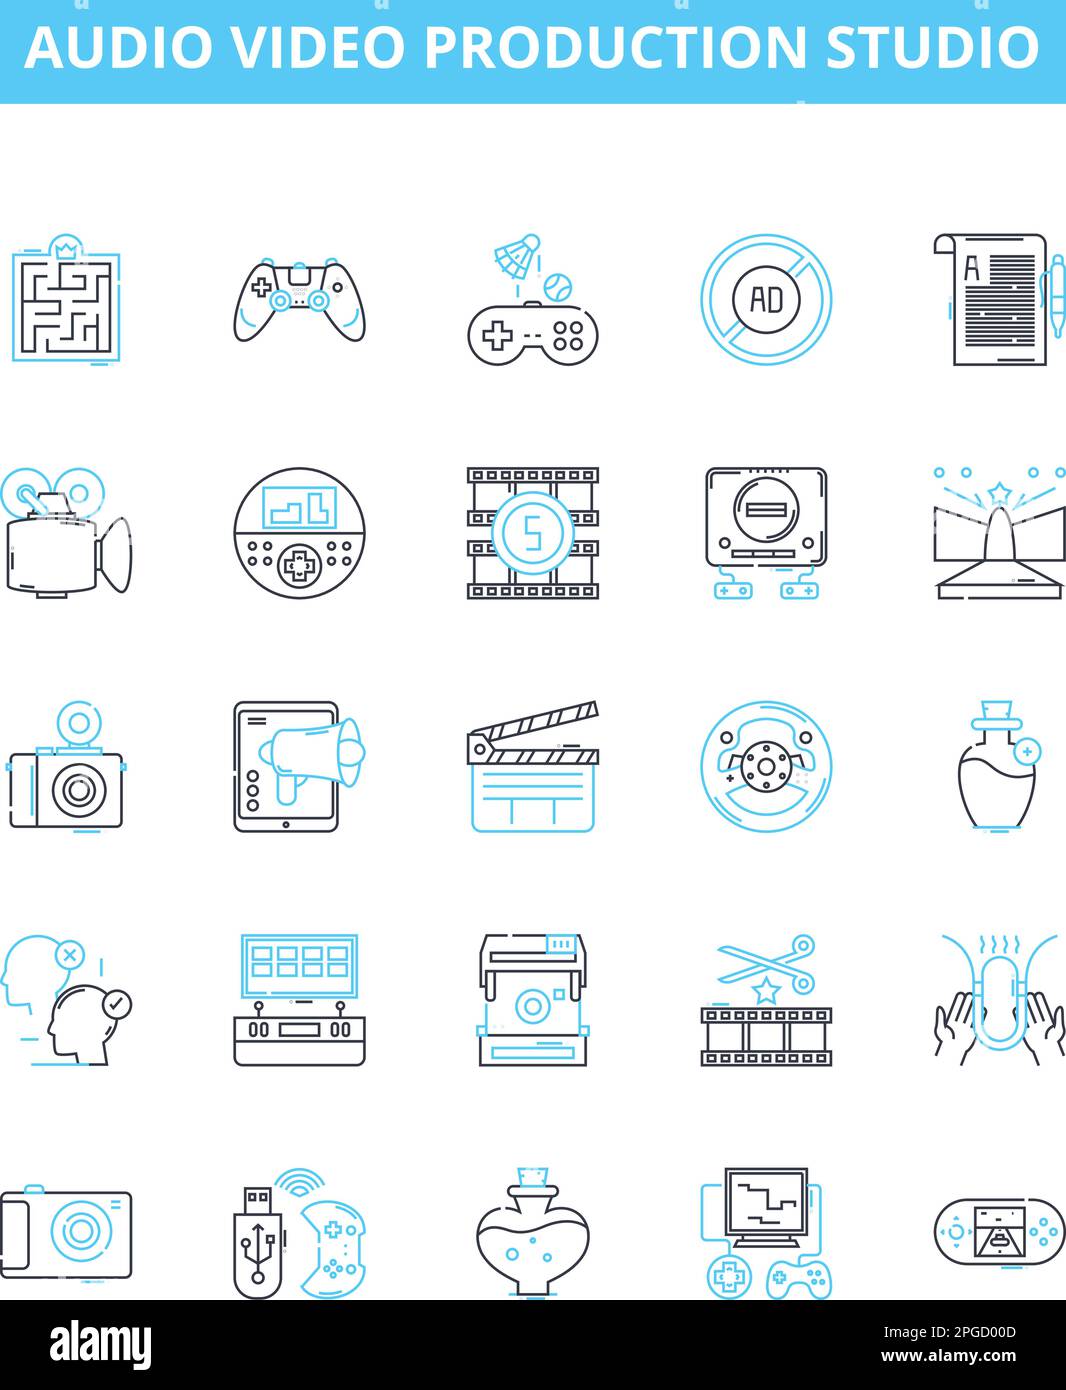 Audio video production studio vector line icons set. Recording, Mixing, Mastering, Editing, Dubbing, Broadcasting, Commercials illustration outline Stock Vector